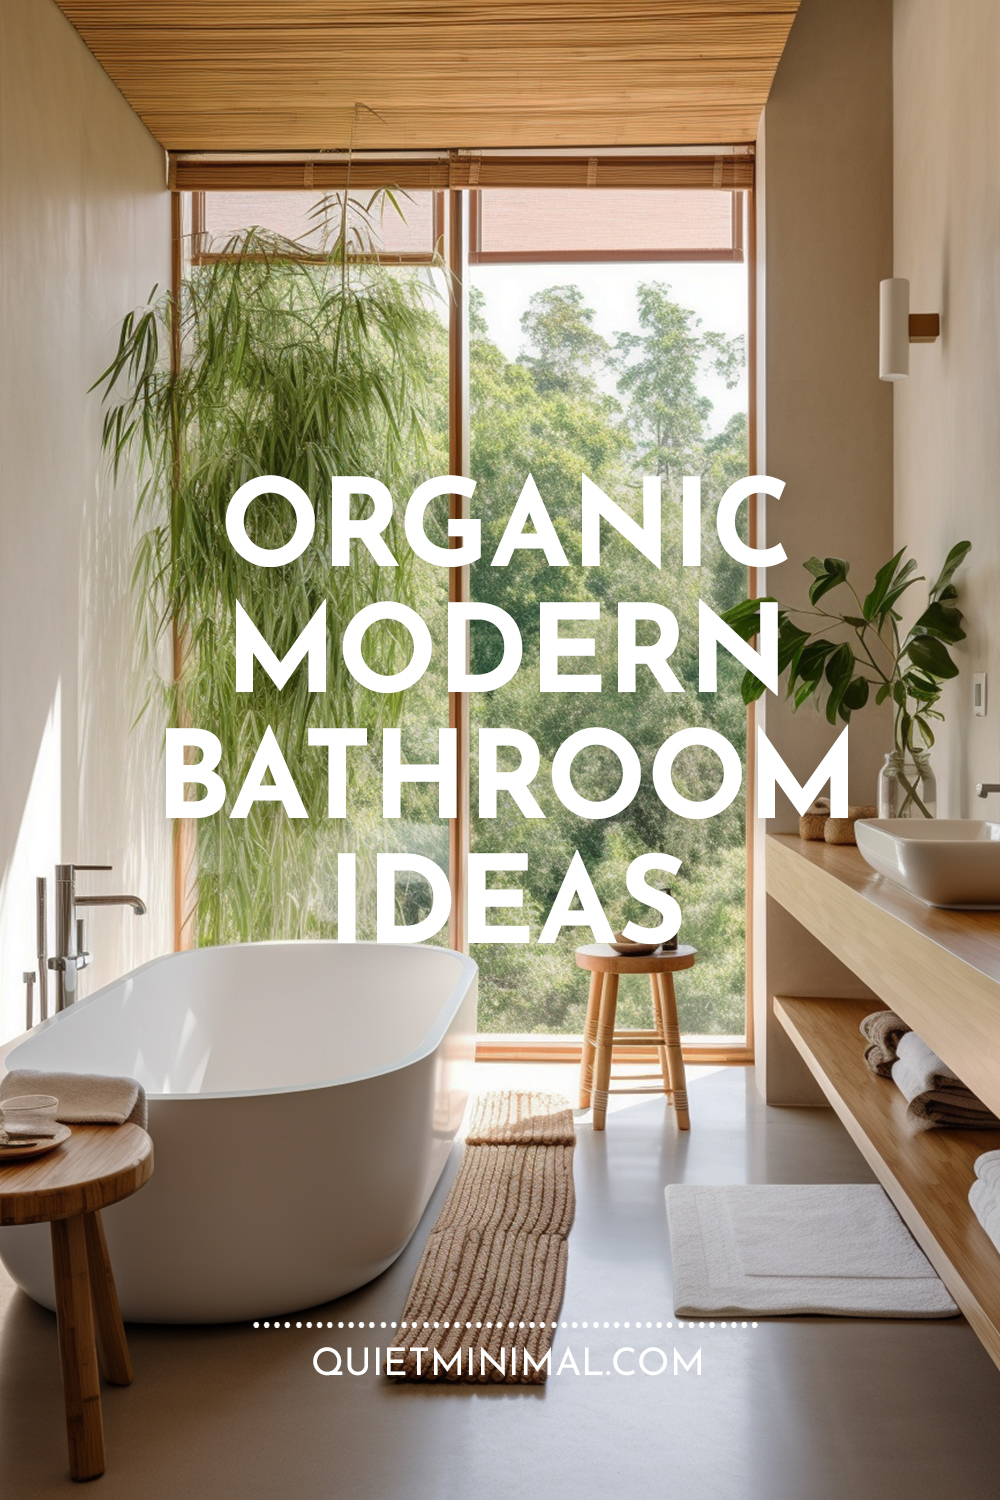 An exquisite and minimalistic organic modern bathroom that embodies the latest ideas in bathroom design.